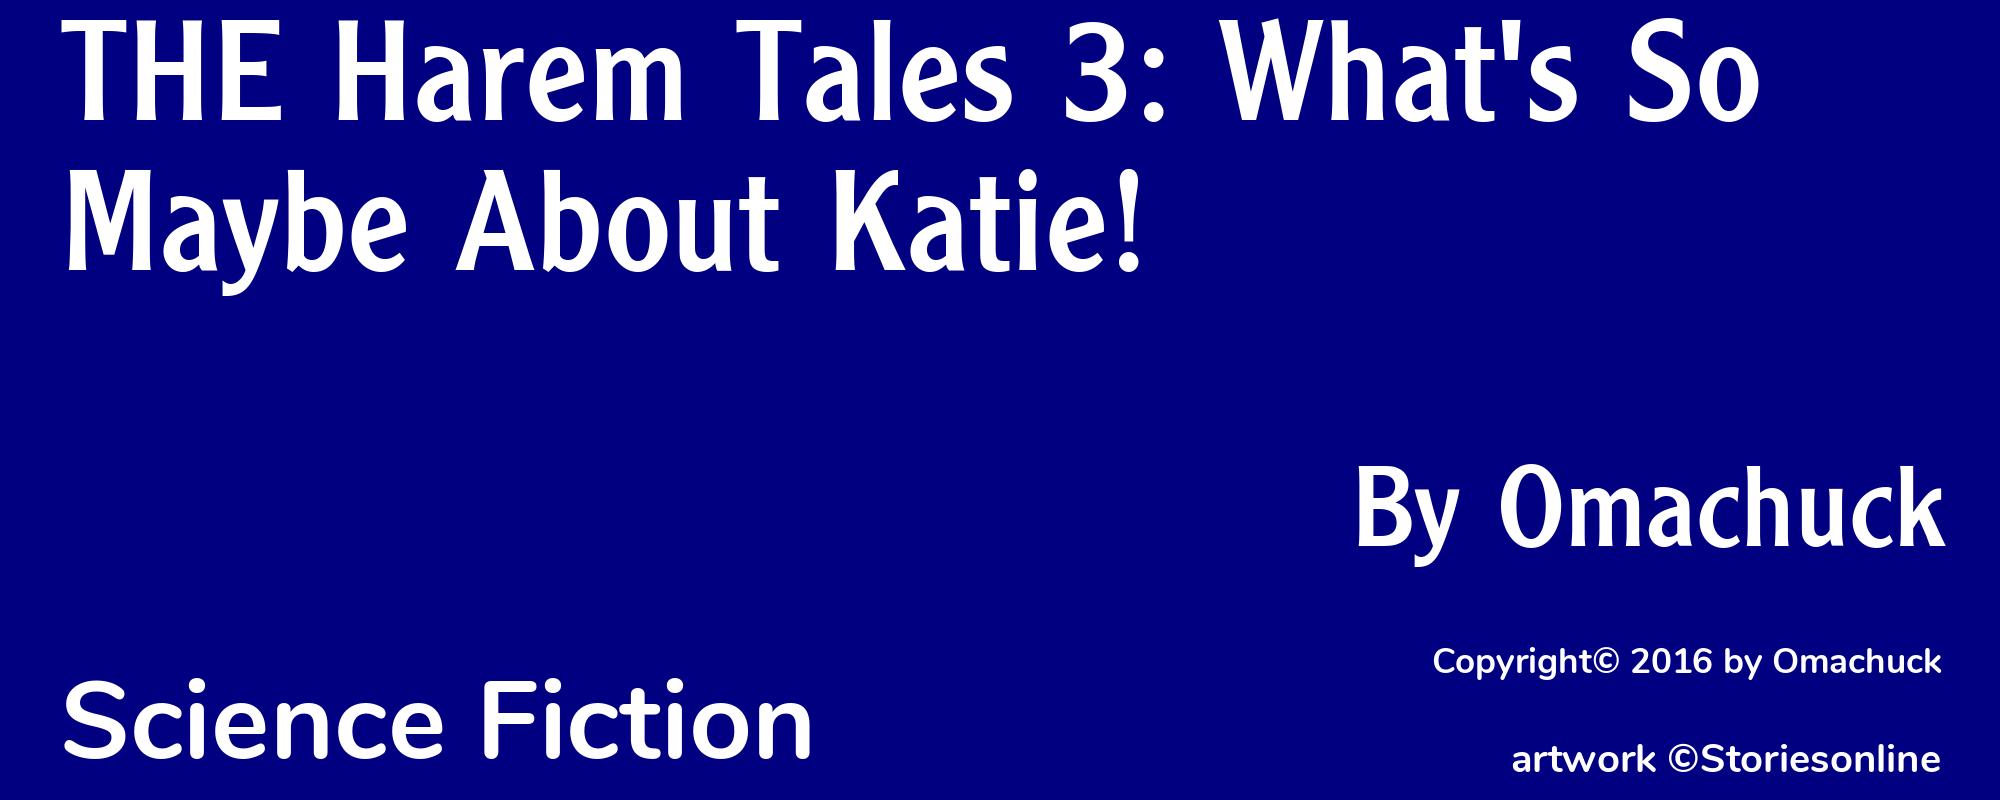 THE Harem Tales 3: What's So Maybe About Katie! - Cover